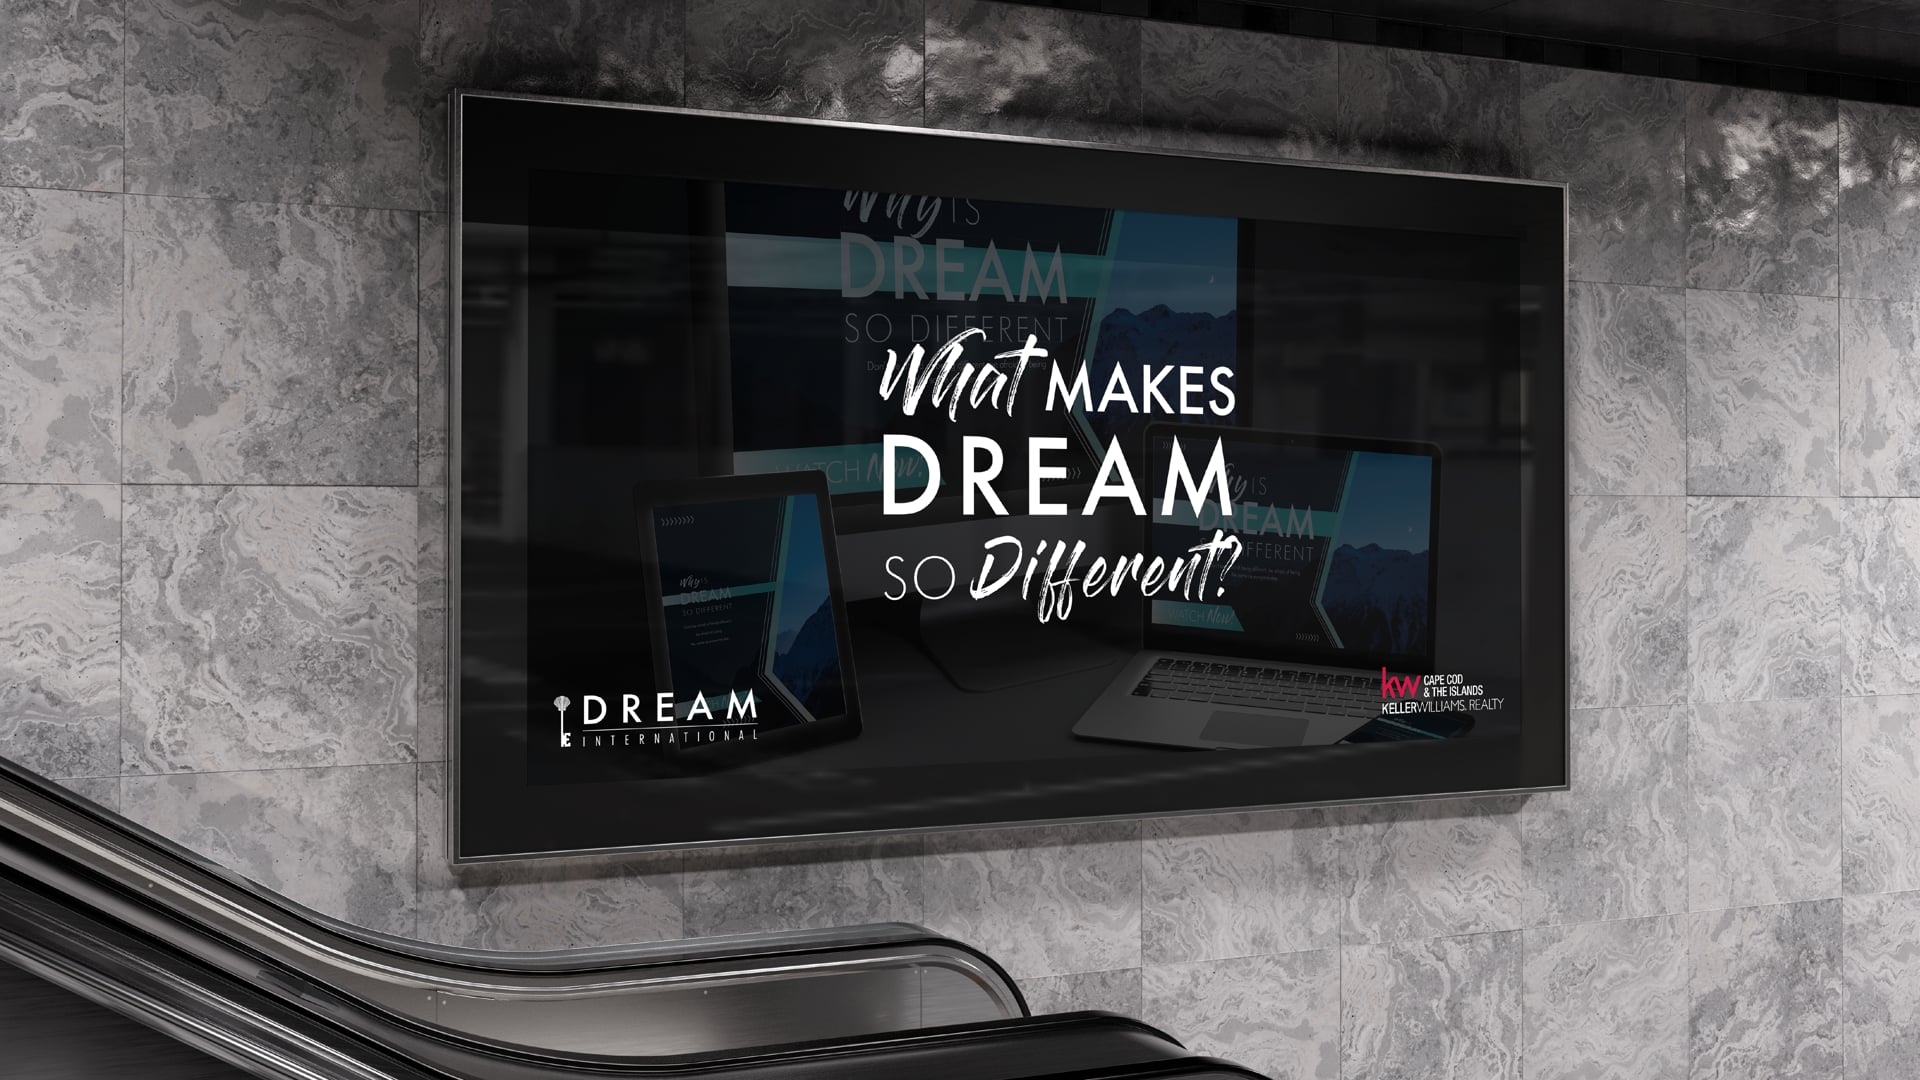 What Makes DREAM So Different?